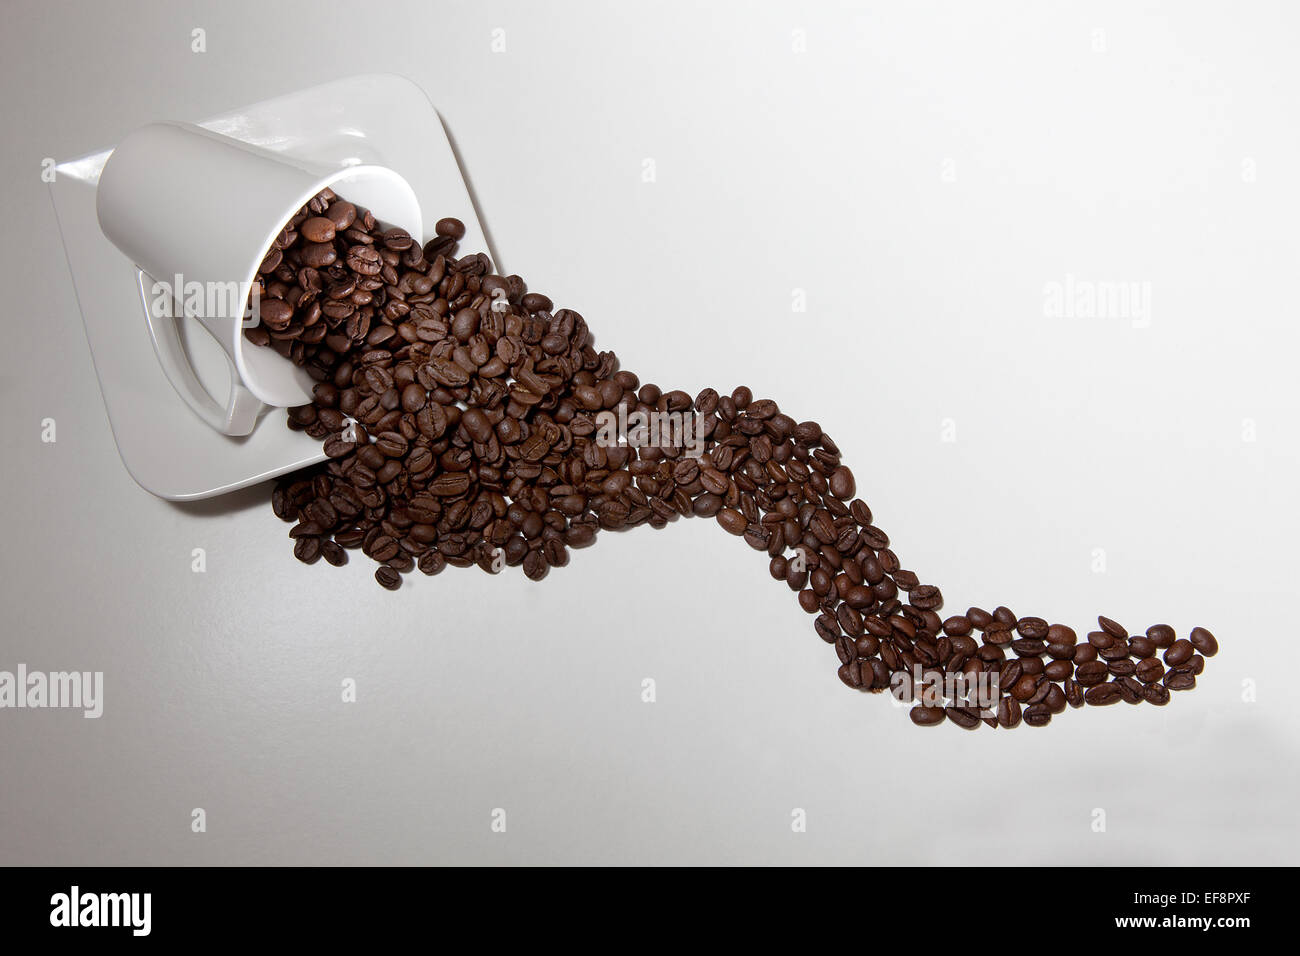 Lying white coffee cup with coffee beans Stock Photo